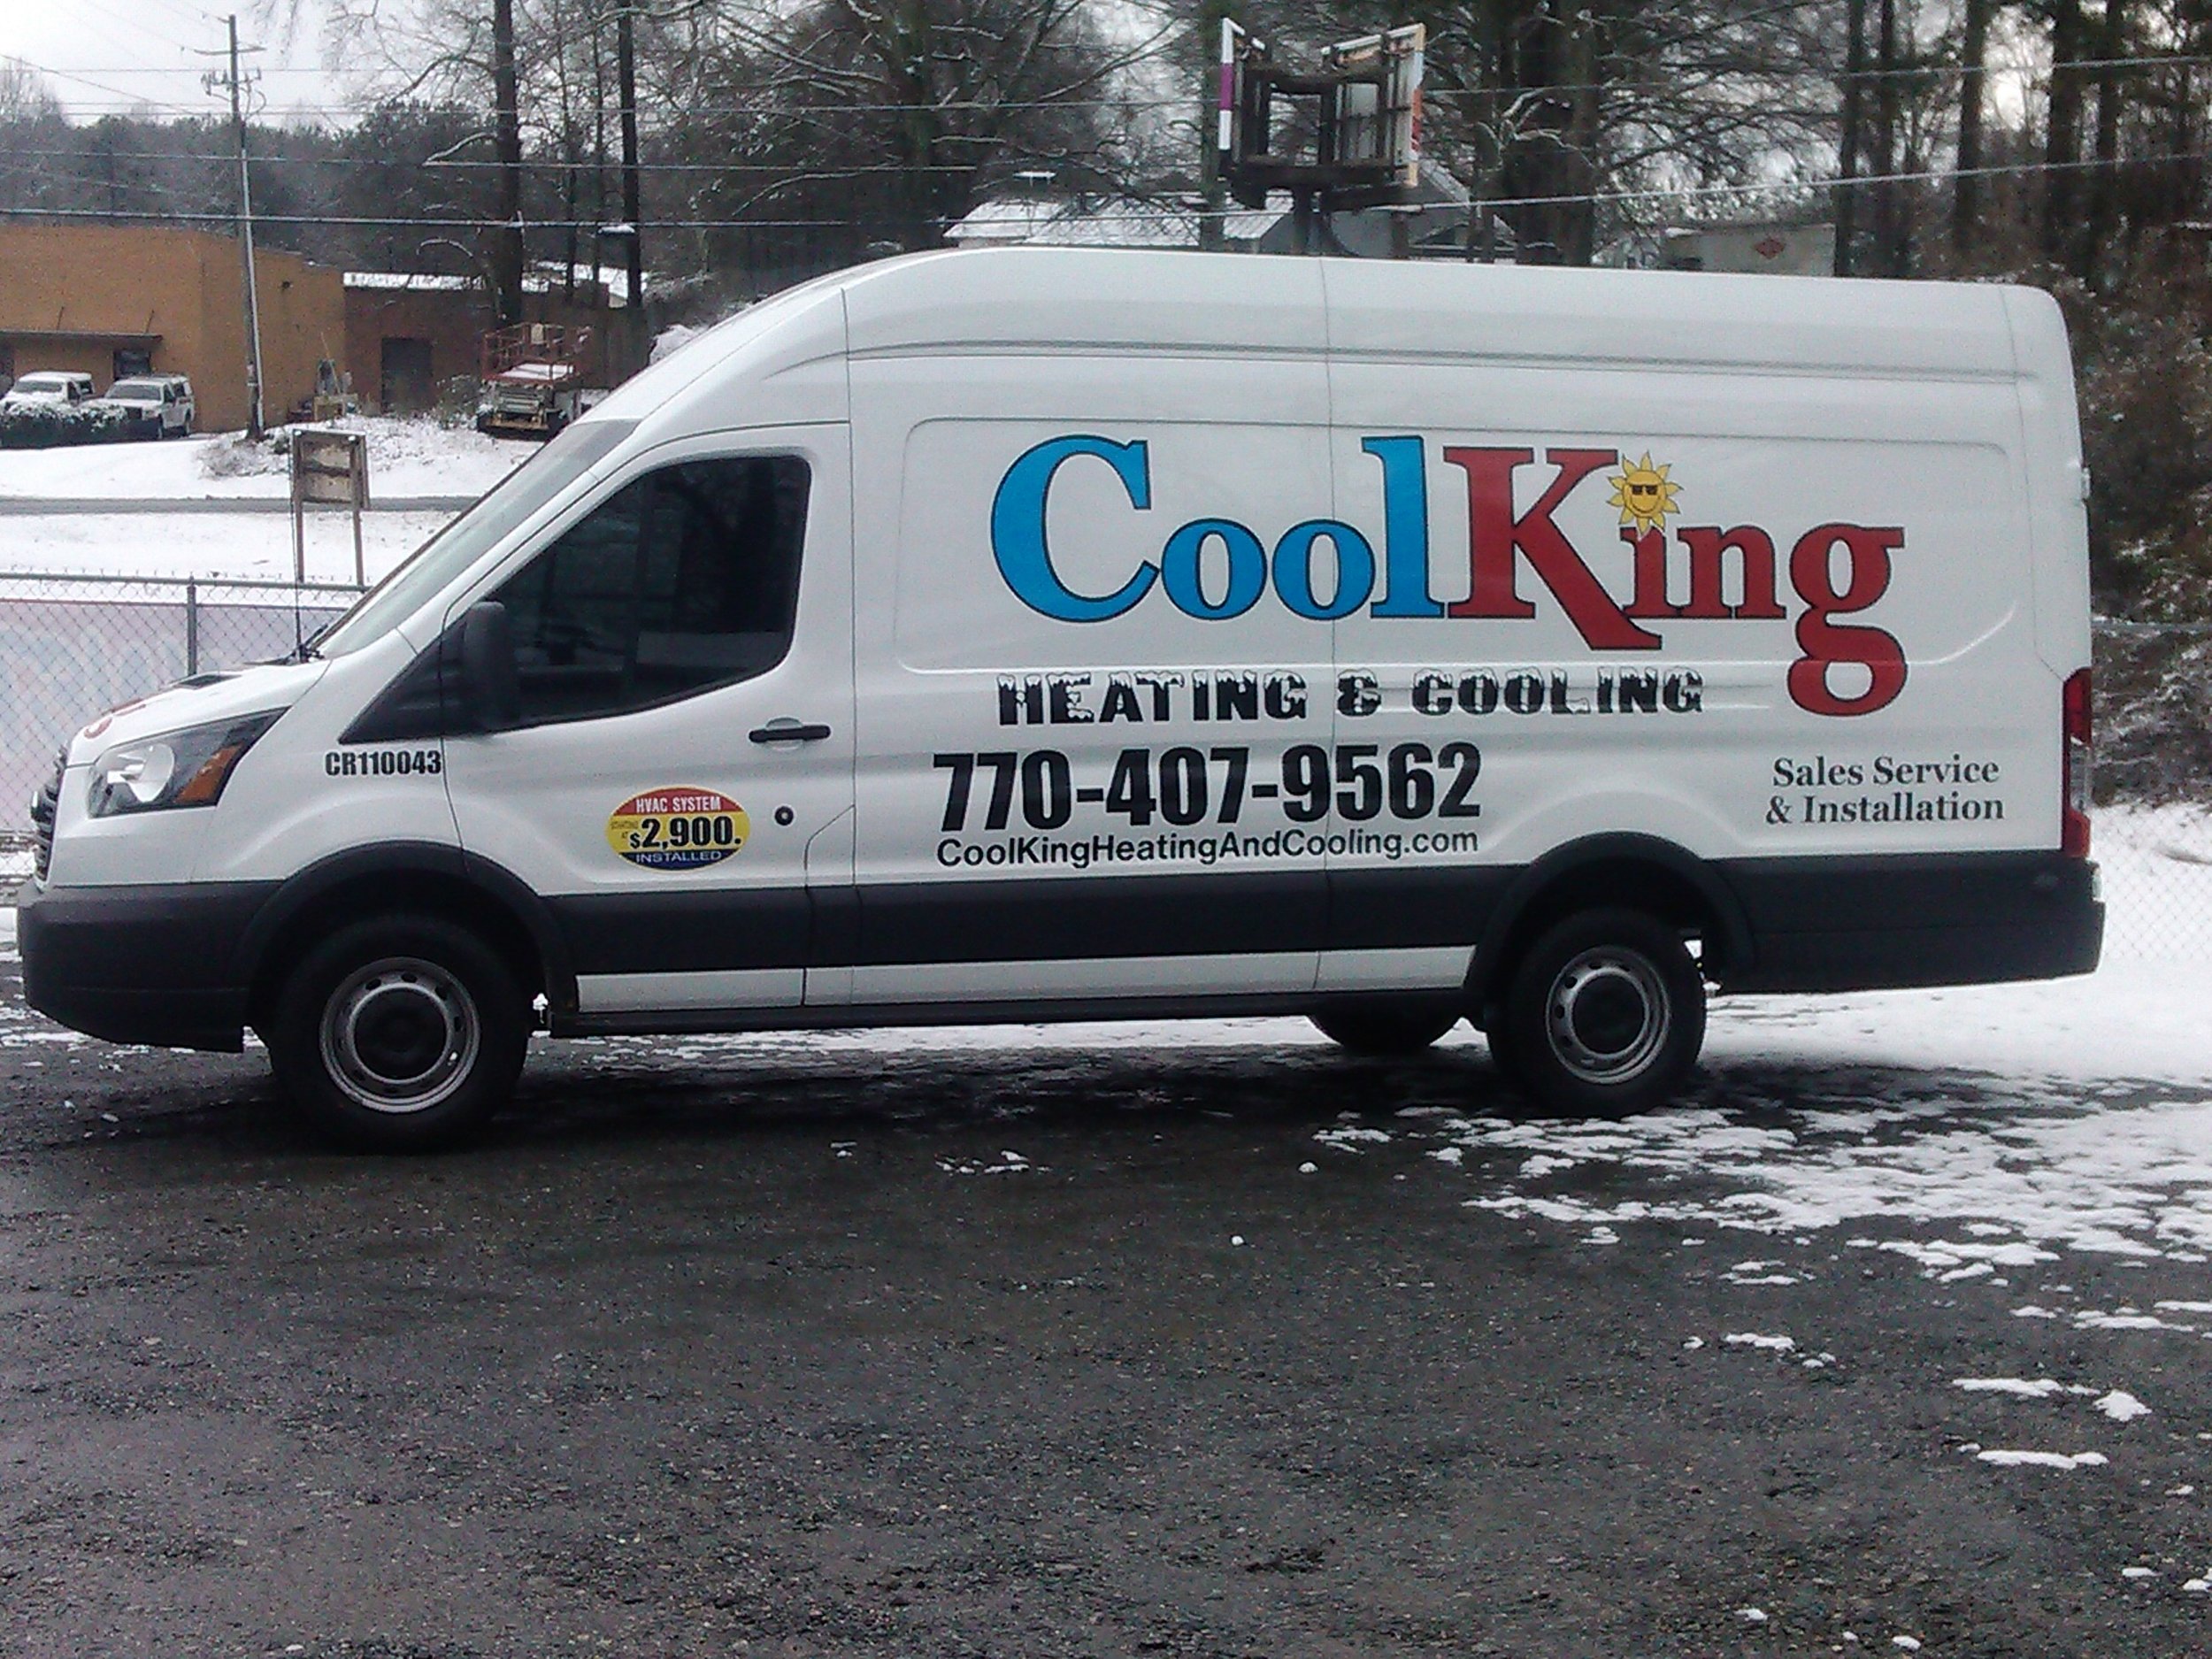 CoolKing heating & cooling - side.jpg